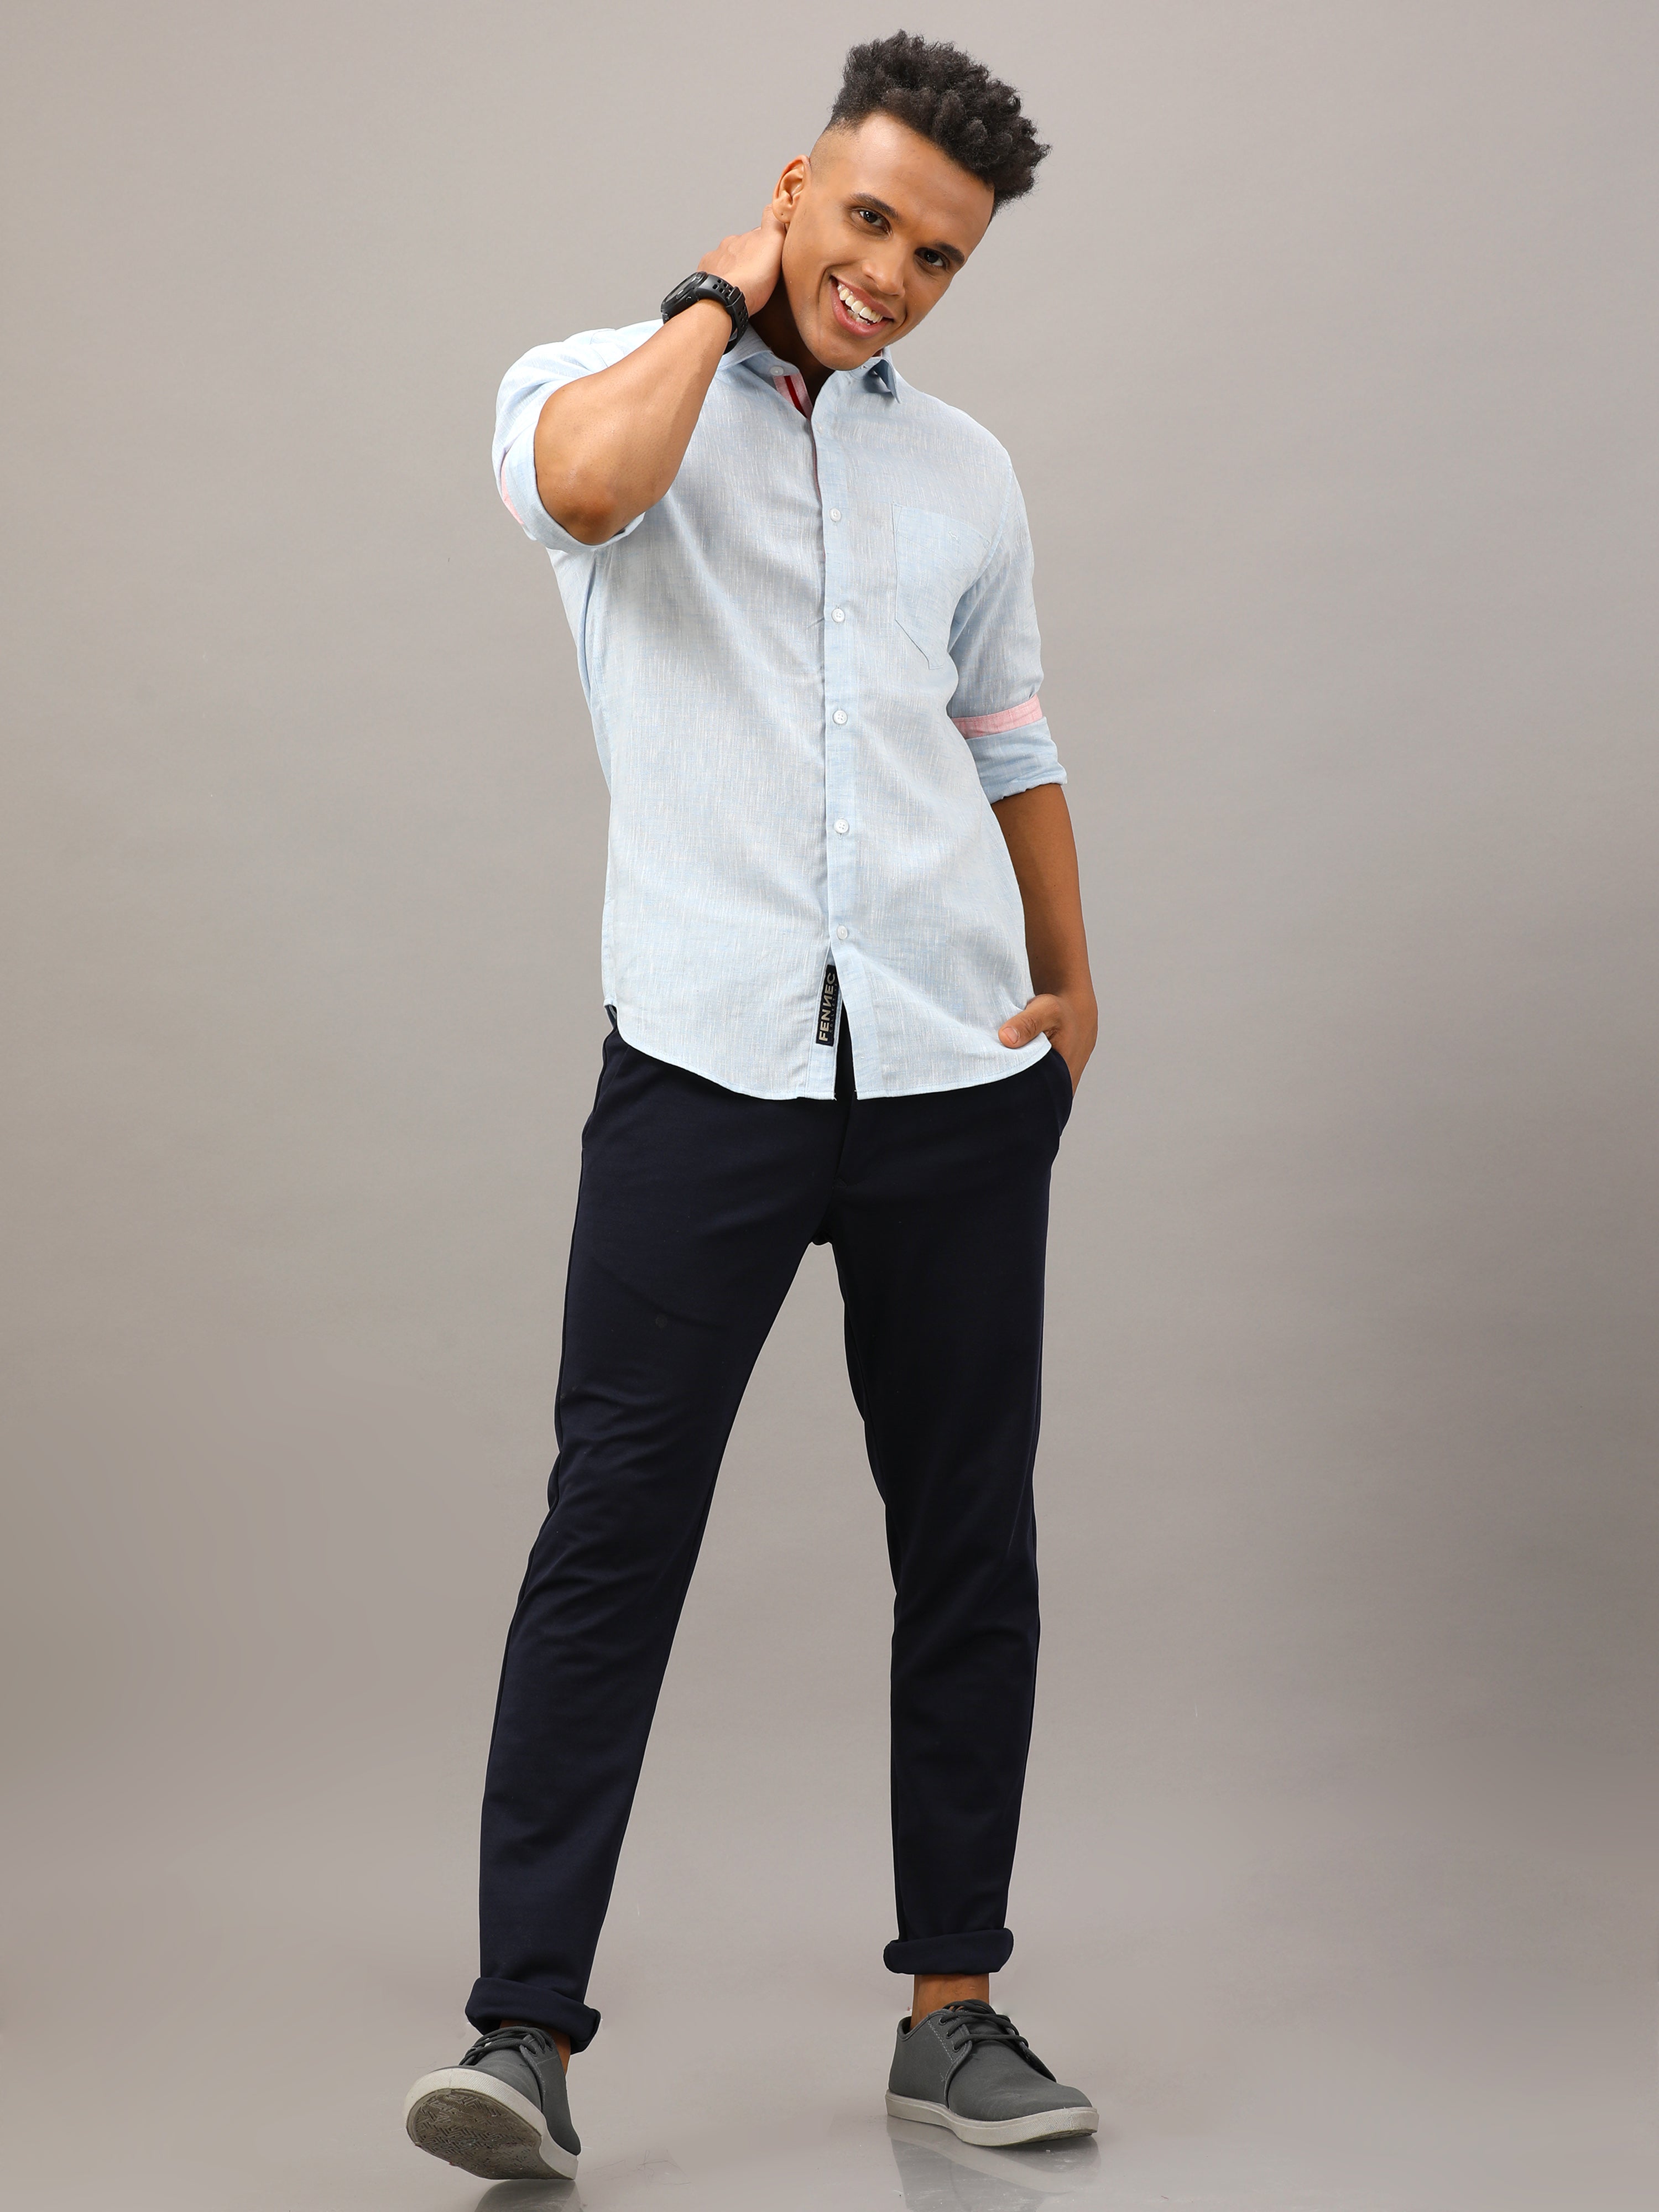 Z46Linen trousers and shirt in an adlib style  Ordenar por